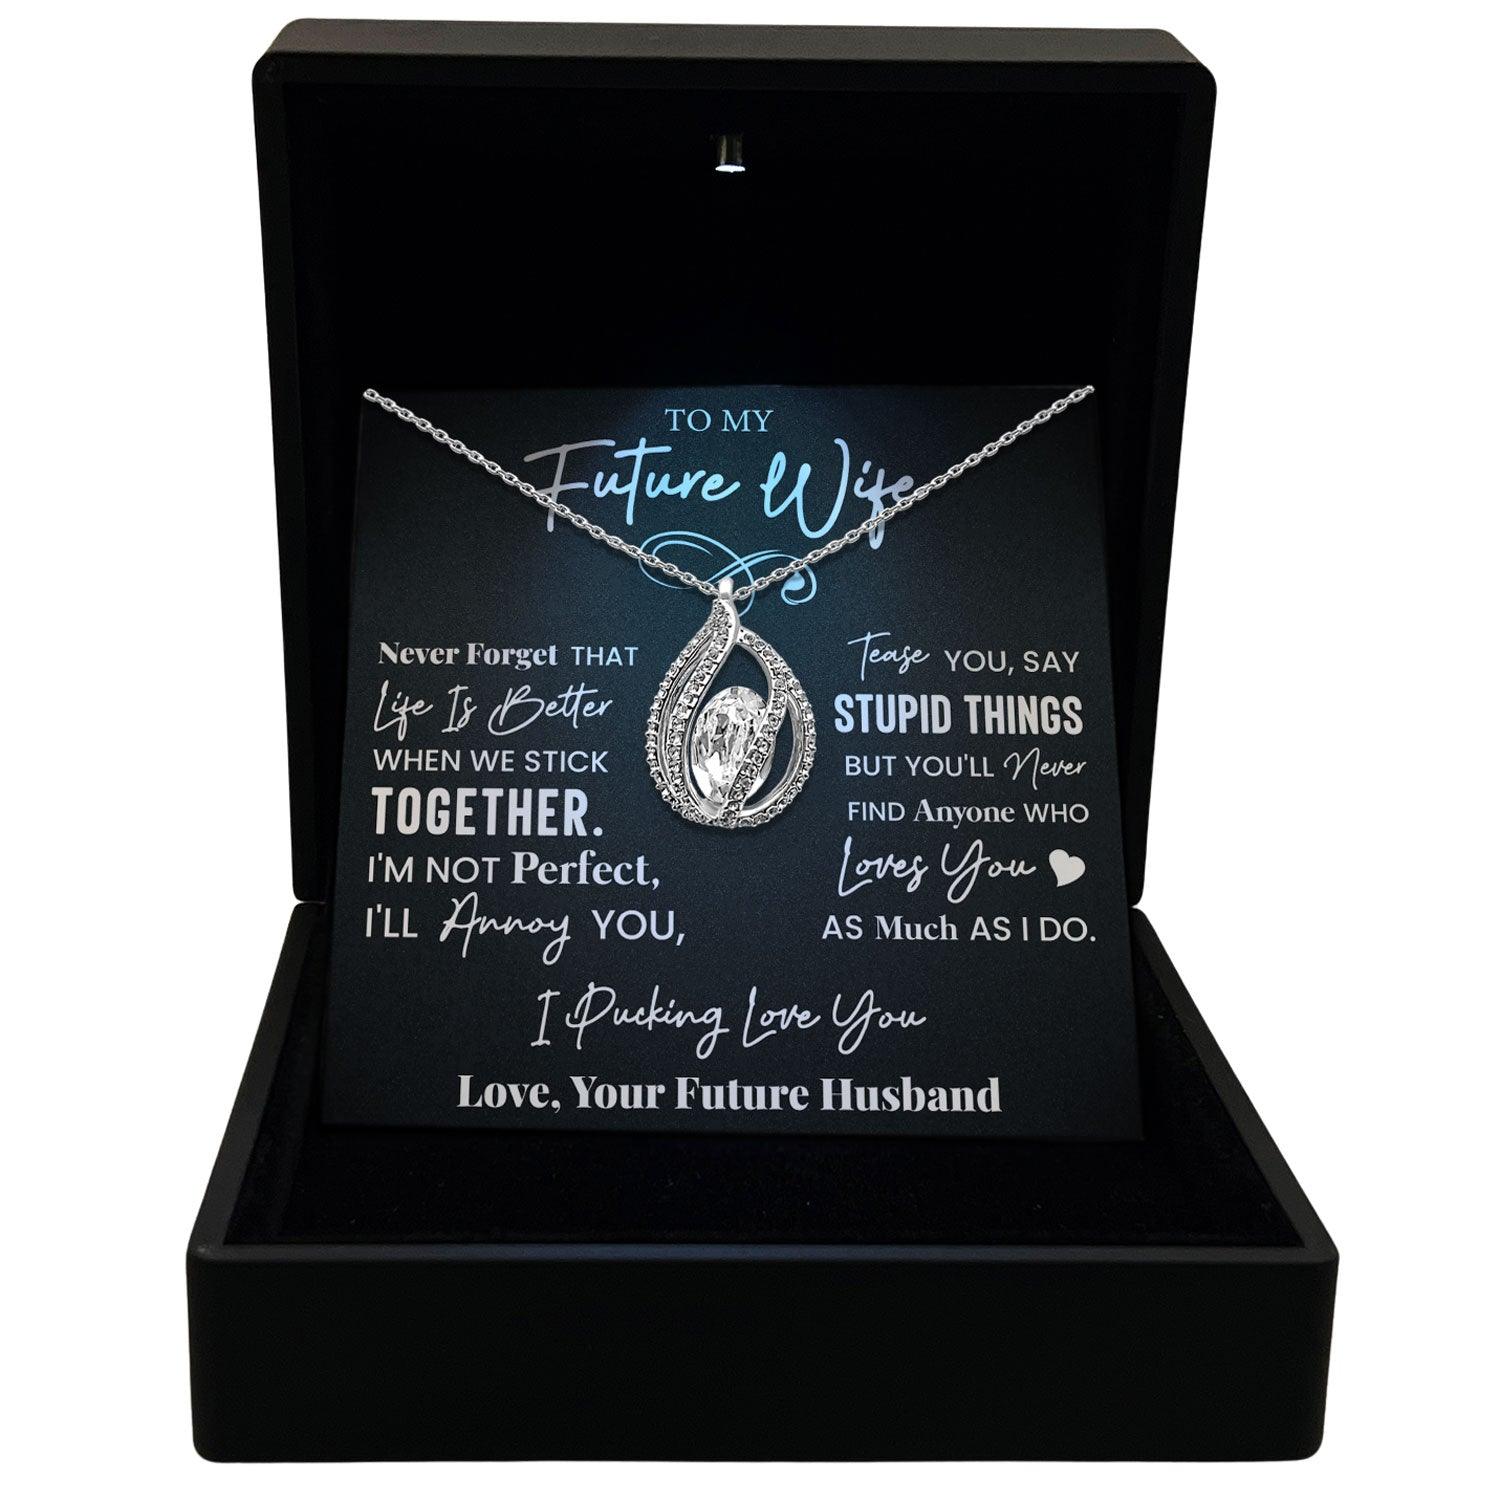 To My Future Wife - Never Forget That Life Is Better When We Stick Together - Orbital Birdcage Necklace - TRYNDI